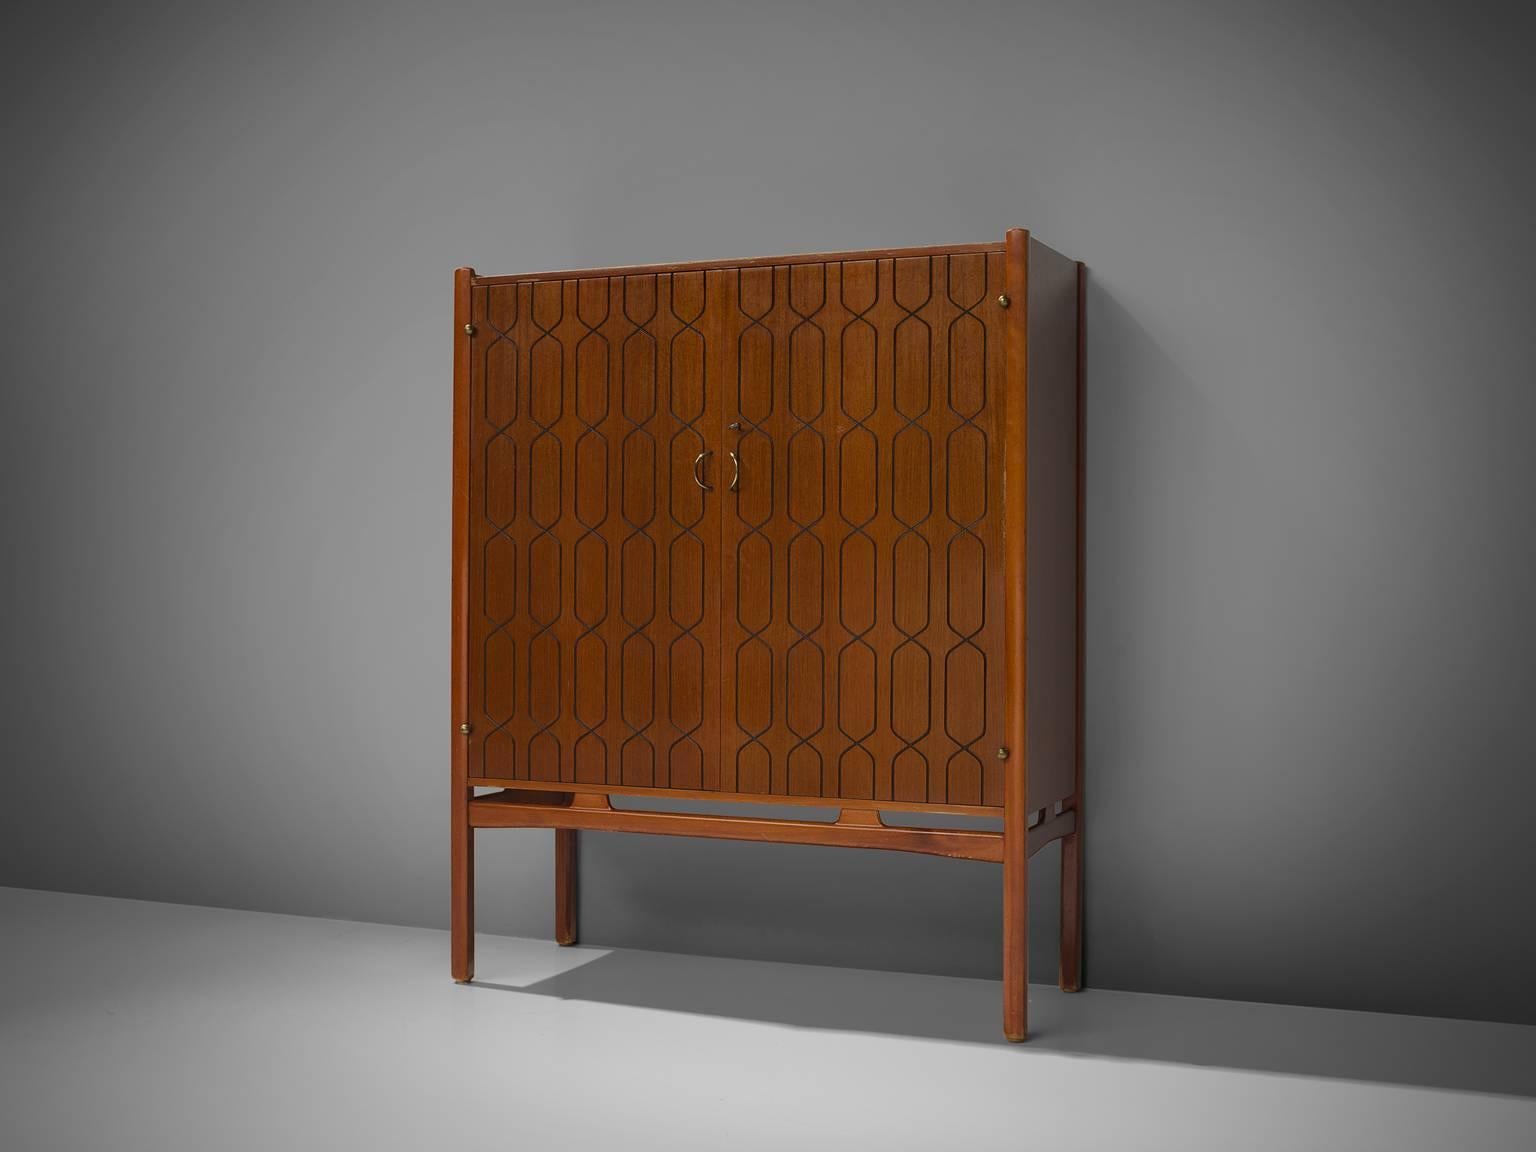 David Rosén for Westbergs Möbler, 'Napoli' cabinet, mahogany and beech, Sweden, circa 1960.

This eloquent cabinet is designed by David Rosén for Westbergs Möbler. The design is quintessential for Rosén who made use of abstract patterns, in which